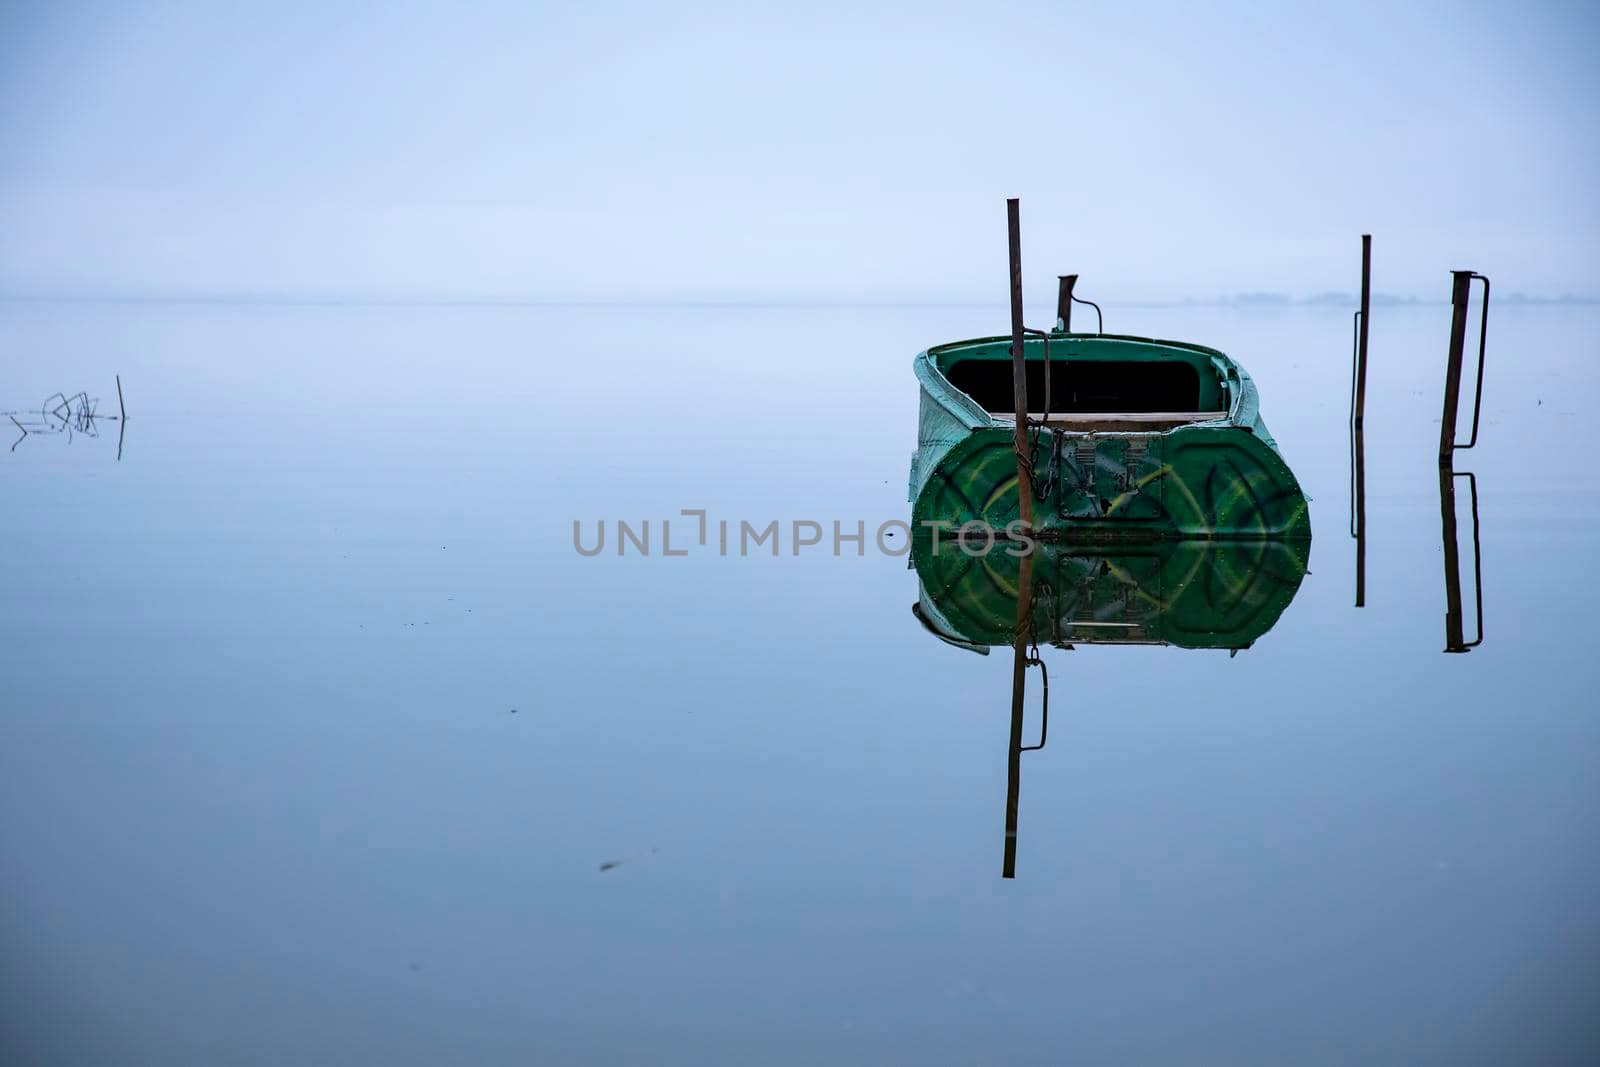 parked empty boat on the lake before sunrise. early morning landscape for fishing. no people